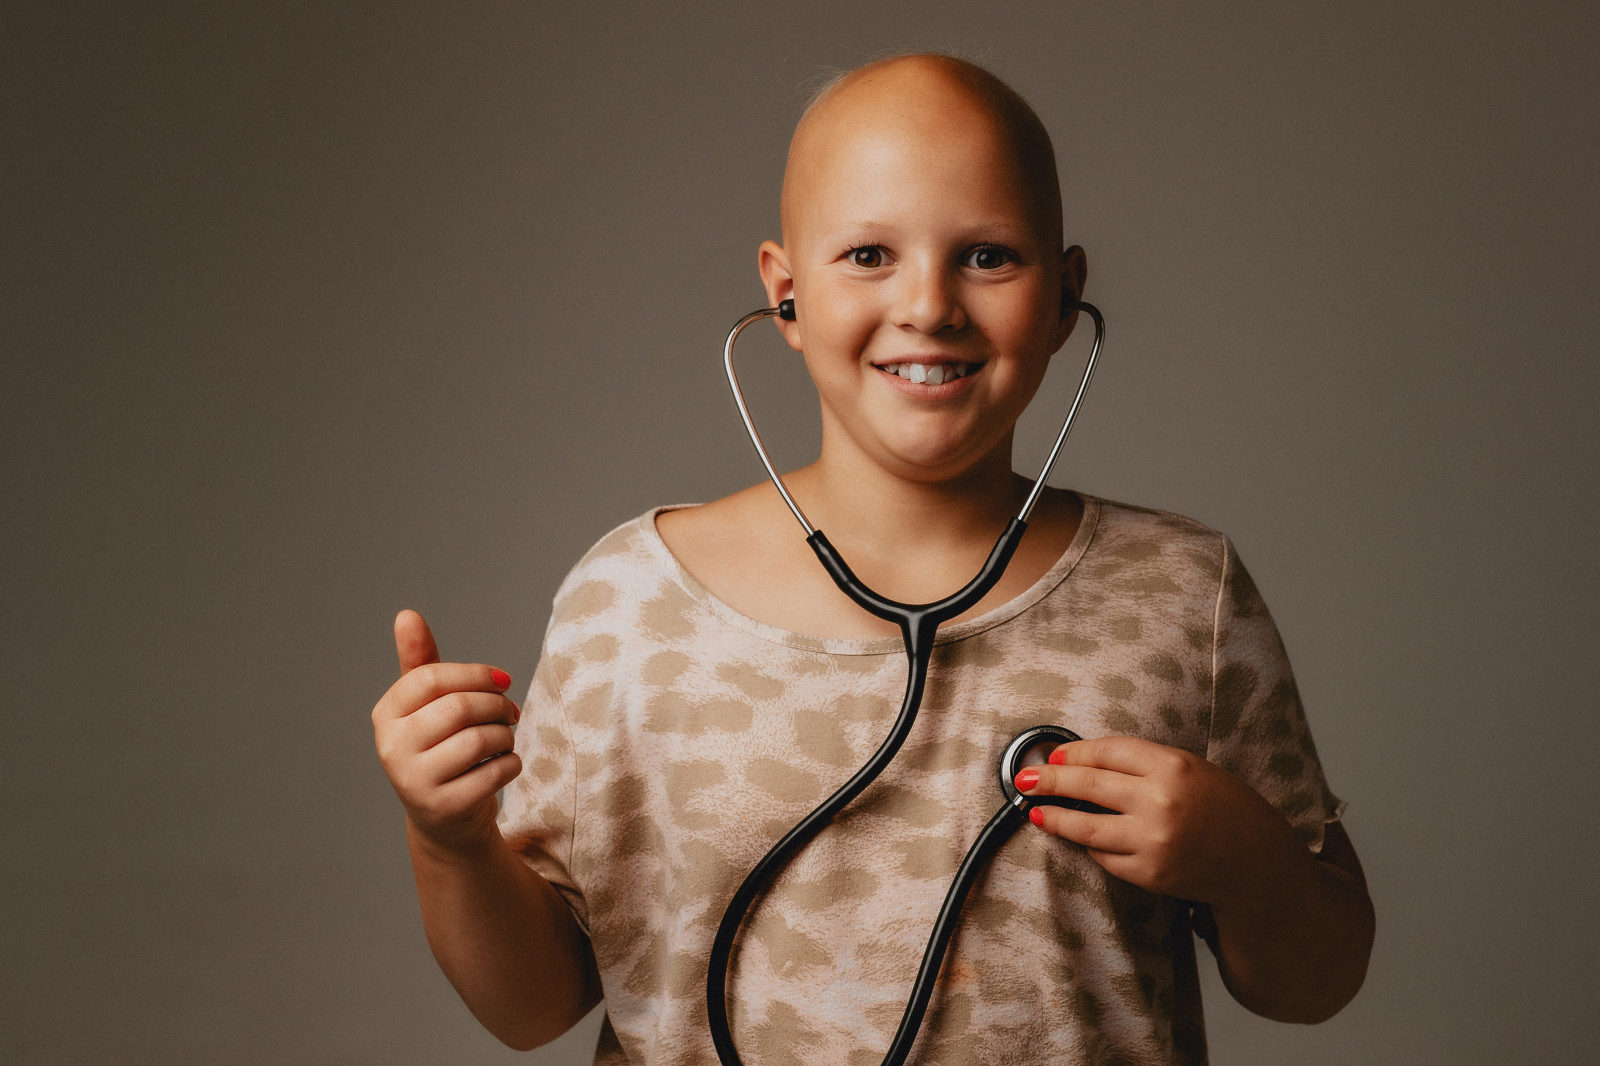 Girl with bald head and stethoscope